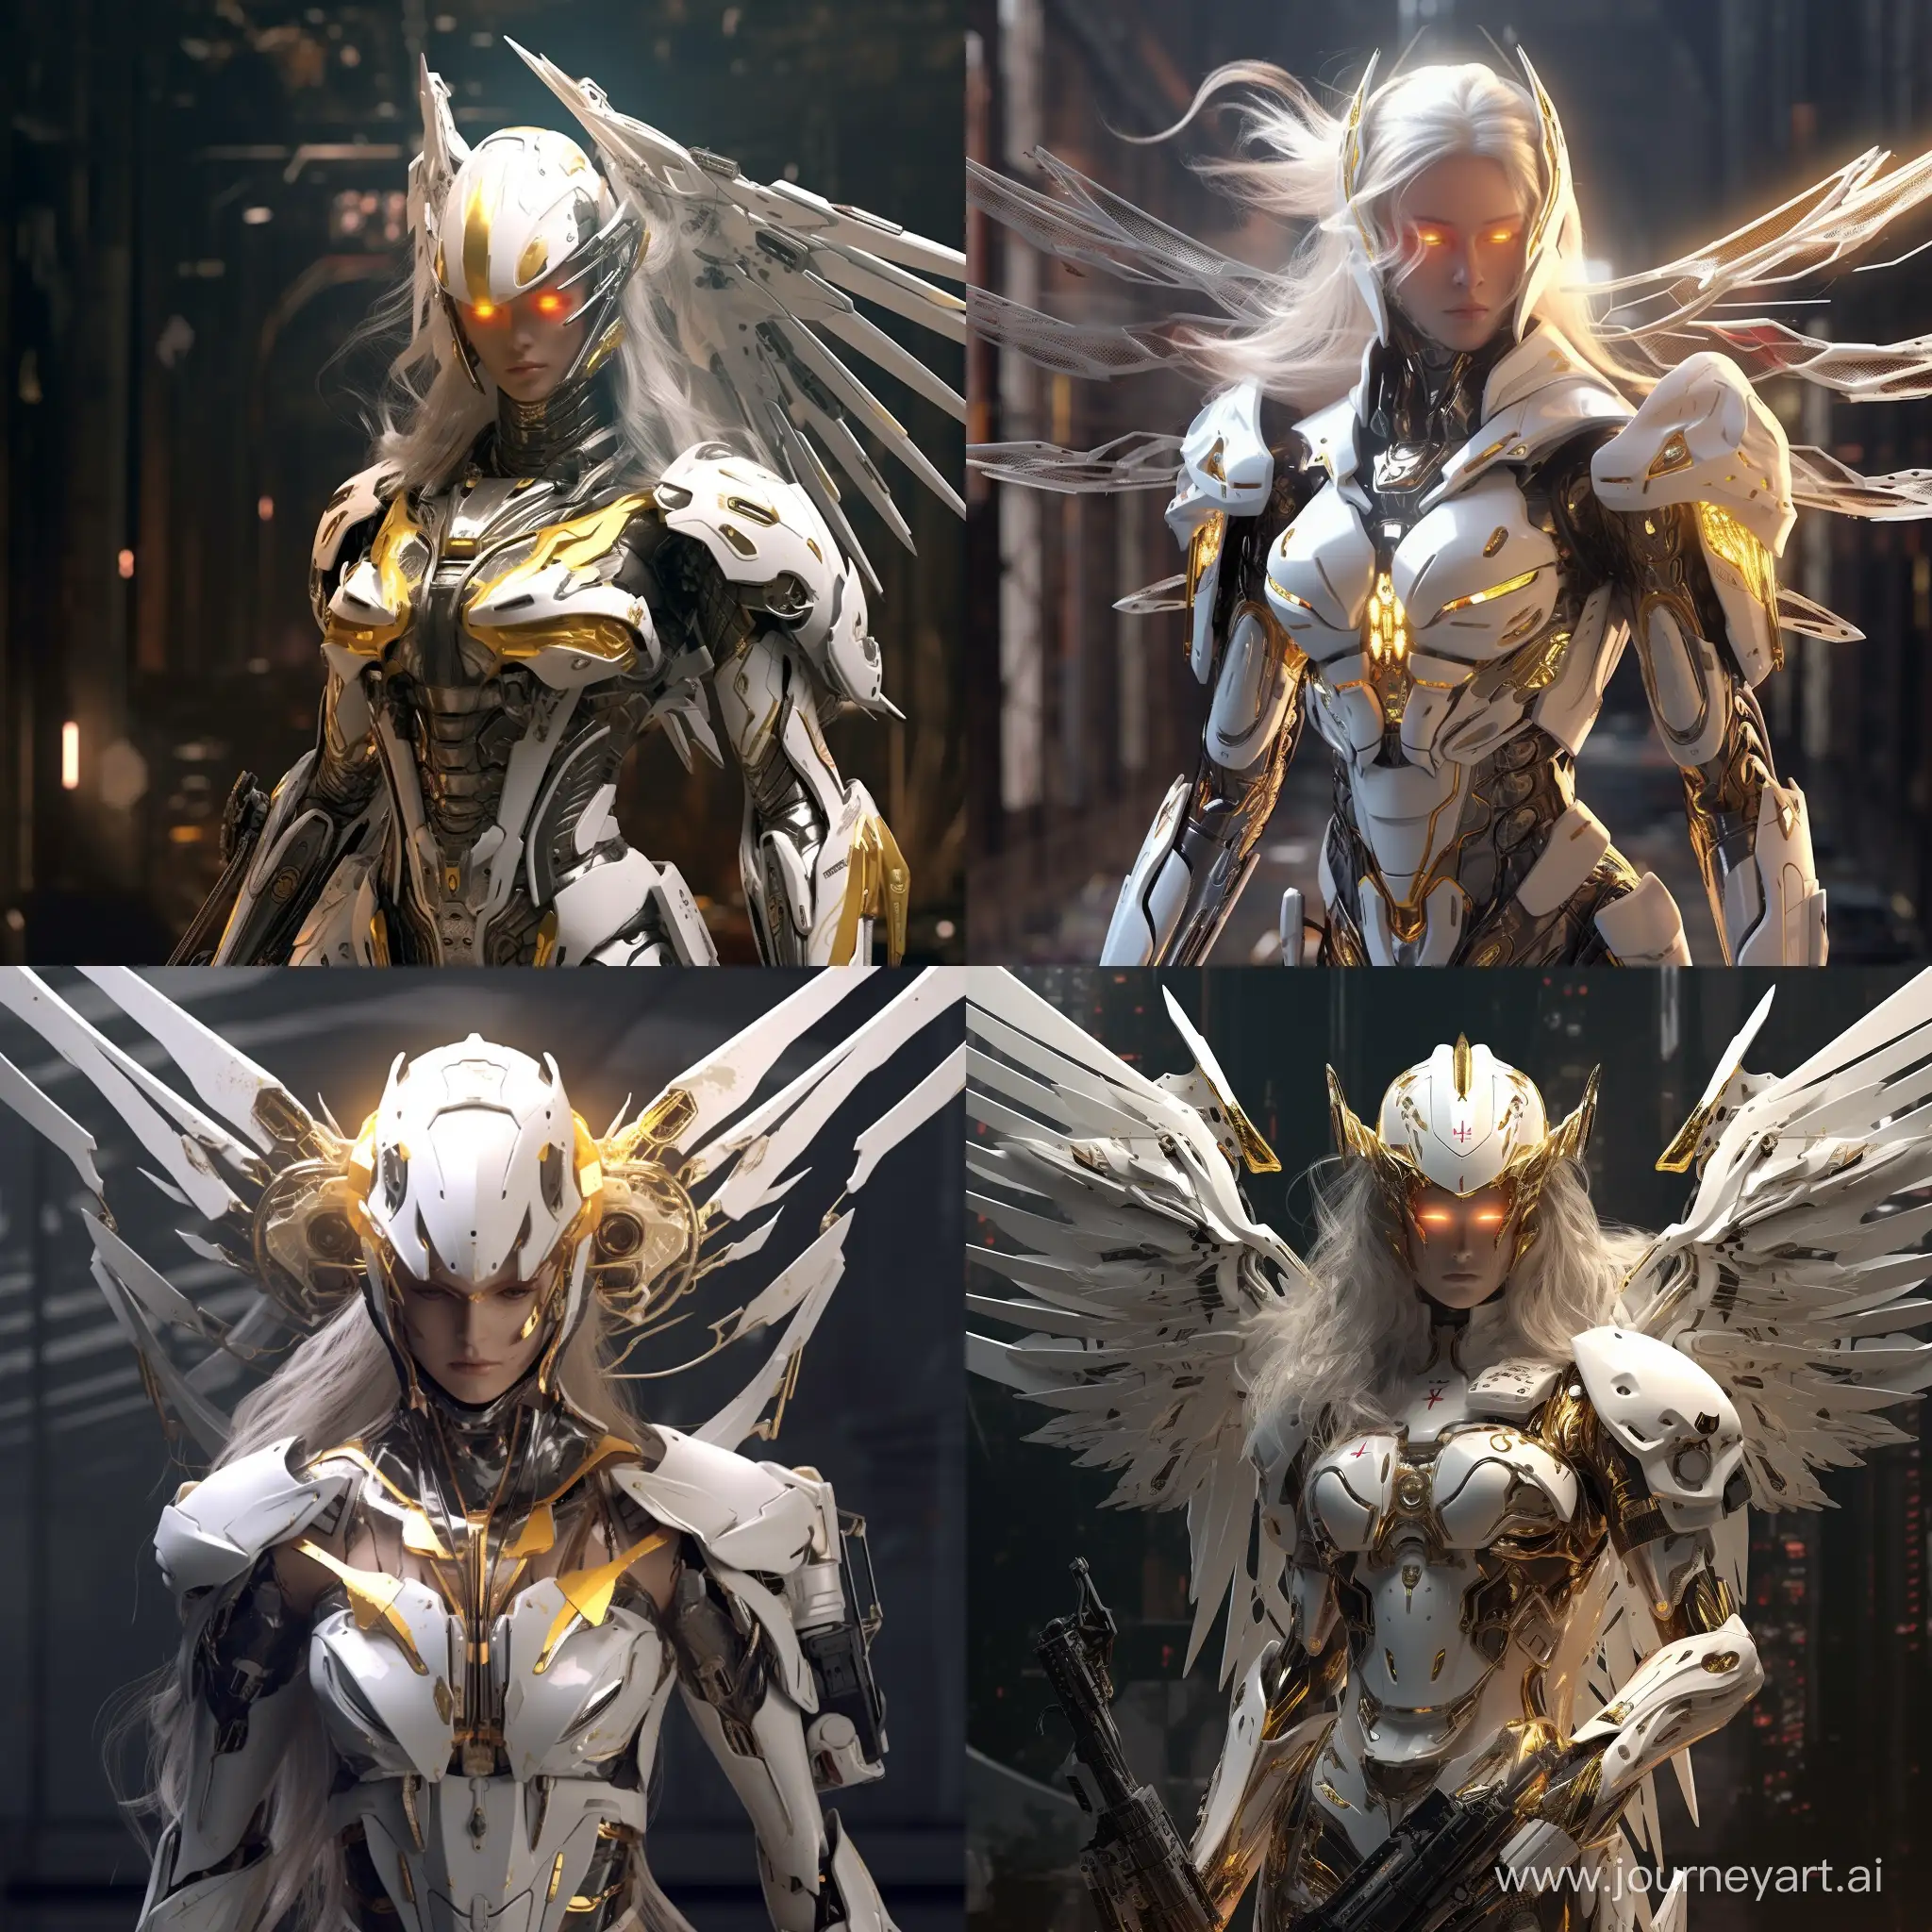 Female Robot with form like angel, white armor with yellow light, future crossbow, head with Halo, closed helmet, cyberpunk style